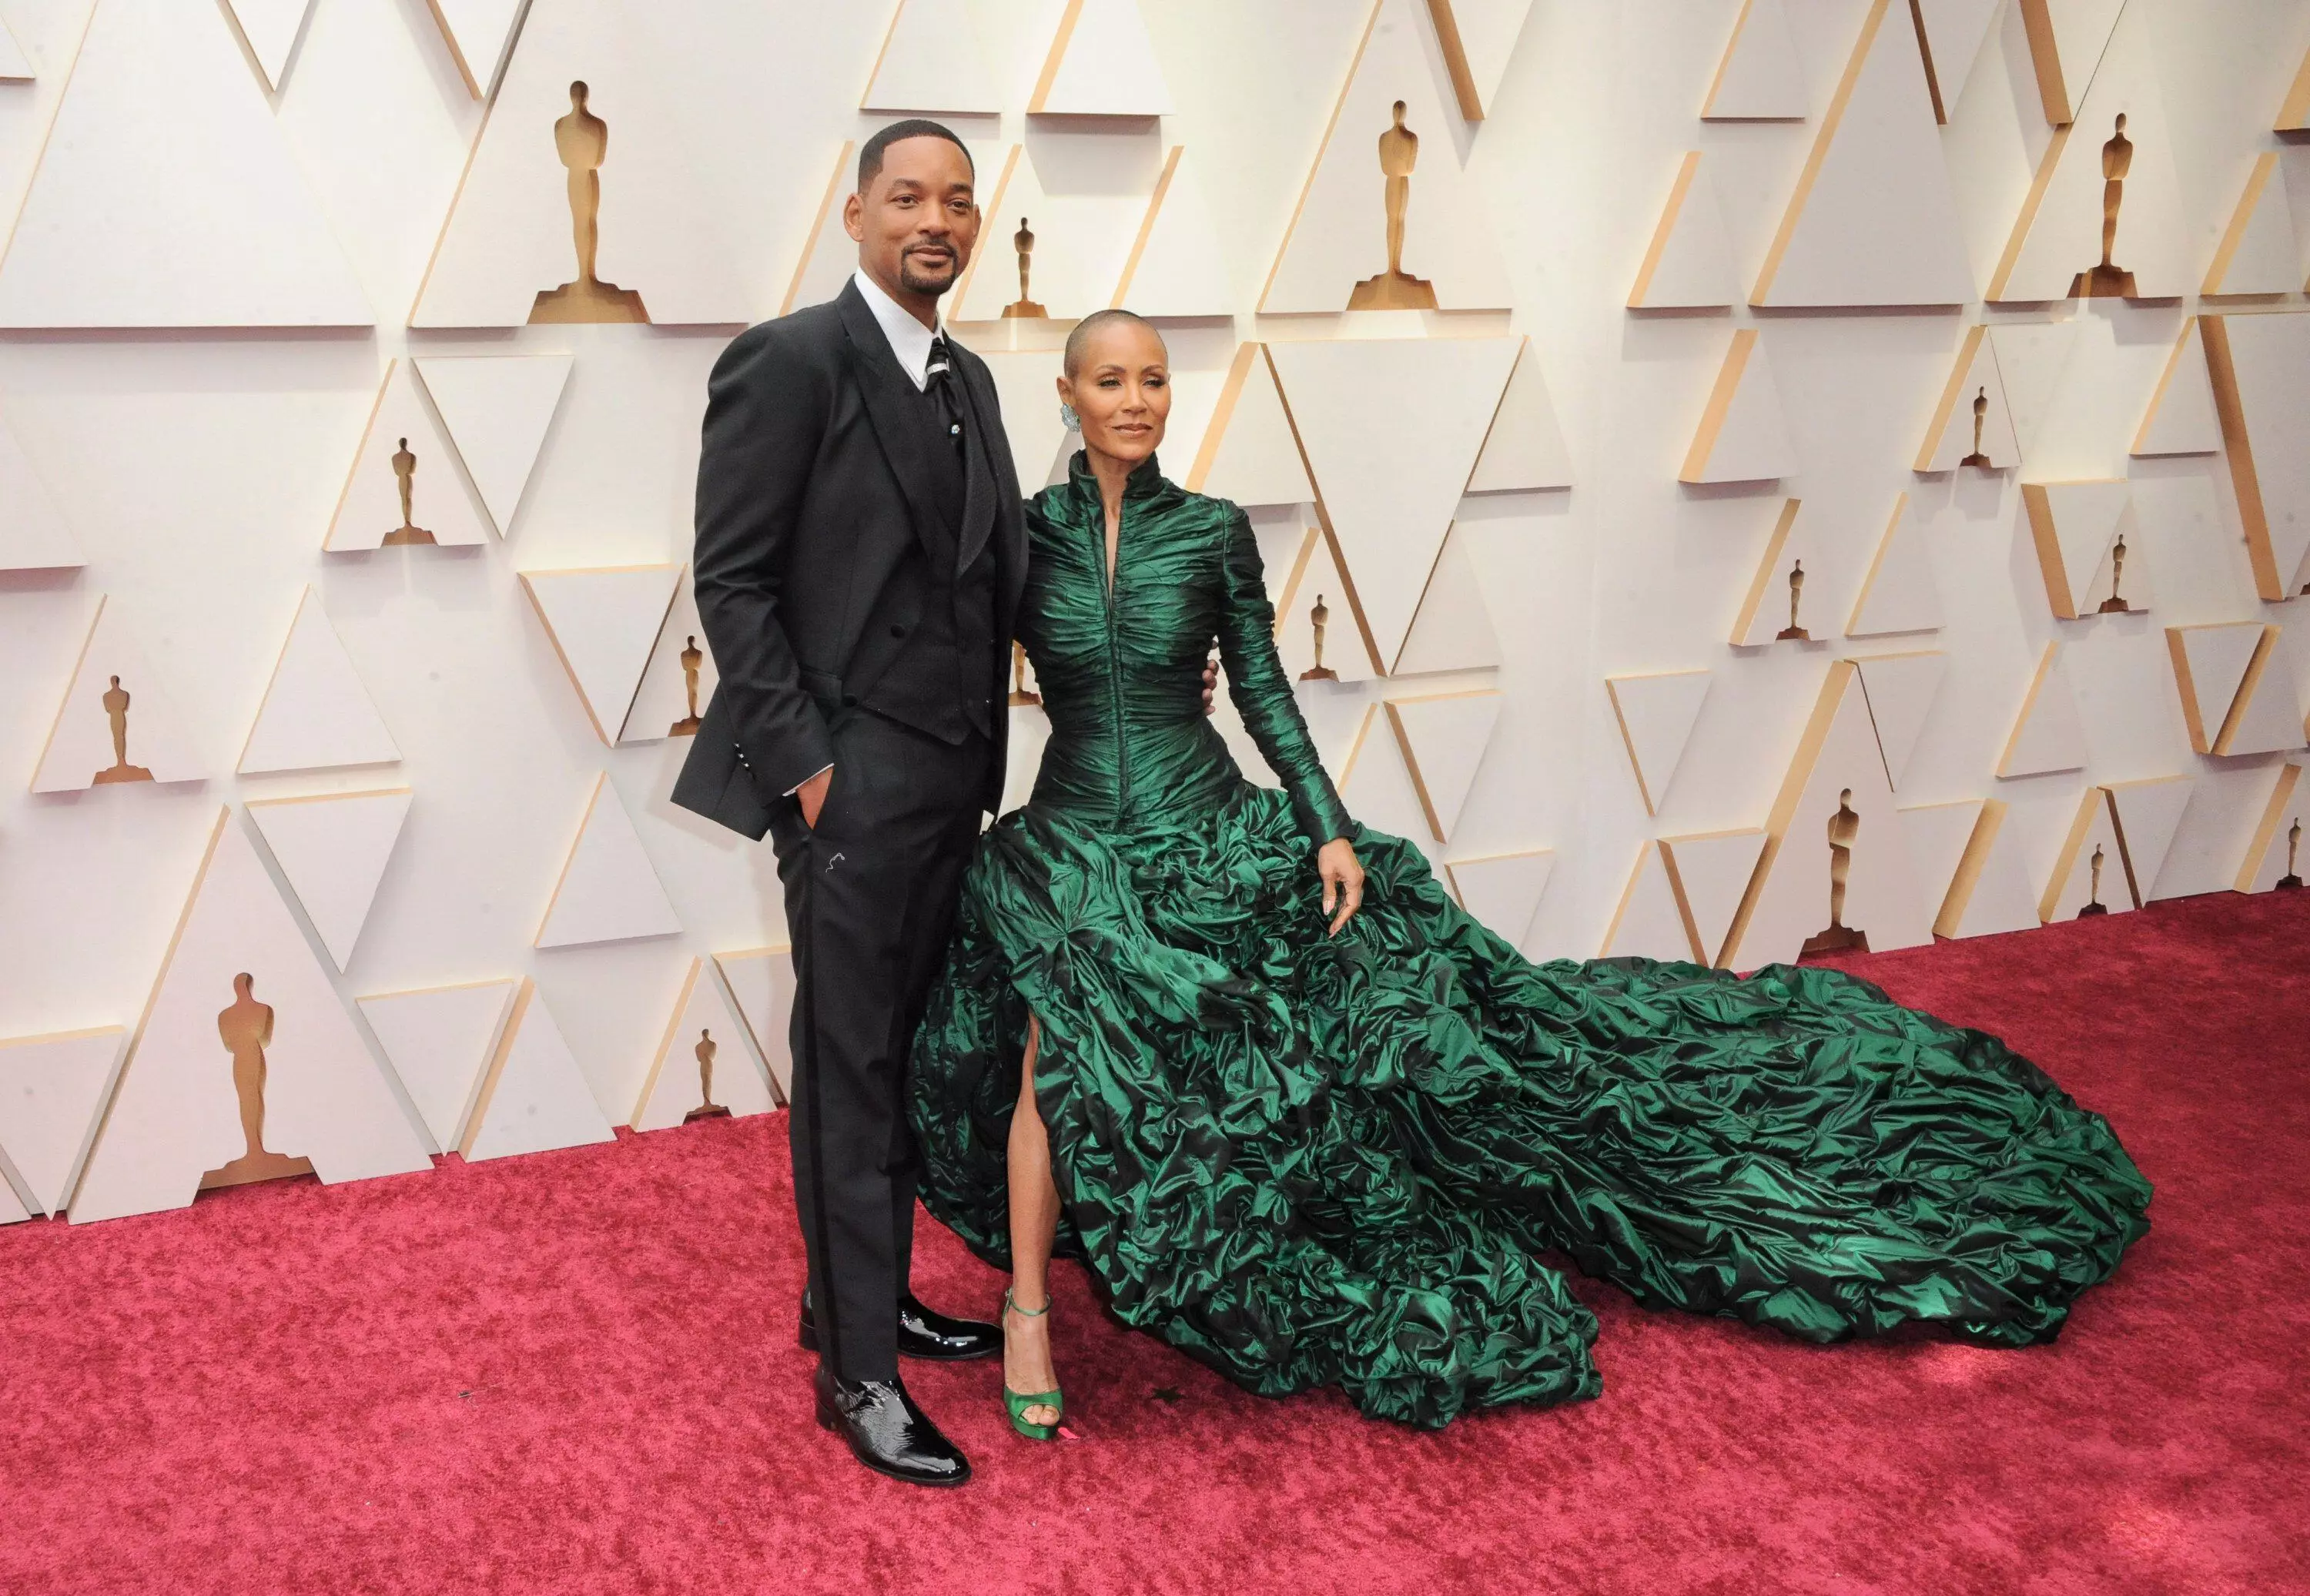 Will Smith and Jada Pinkett-Smith arriving at the Oscars red carpet (